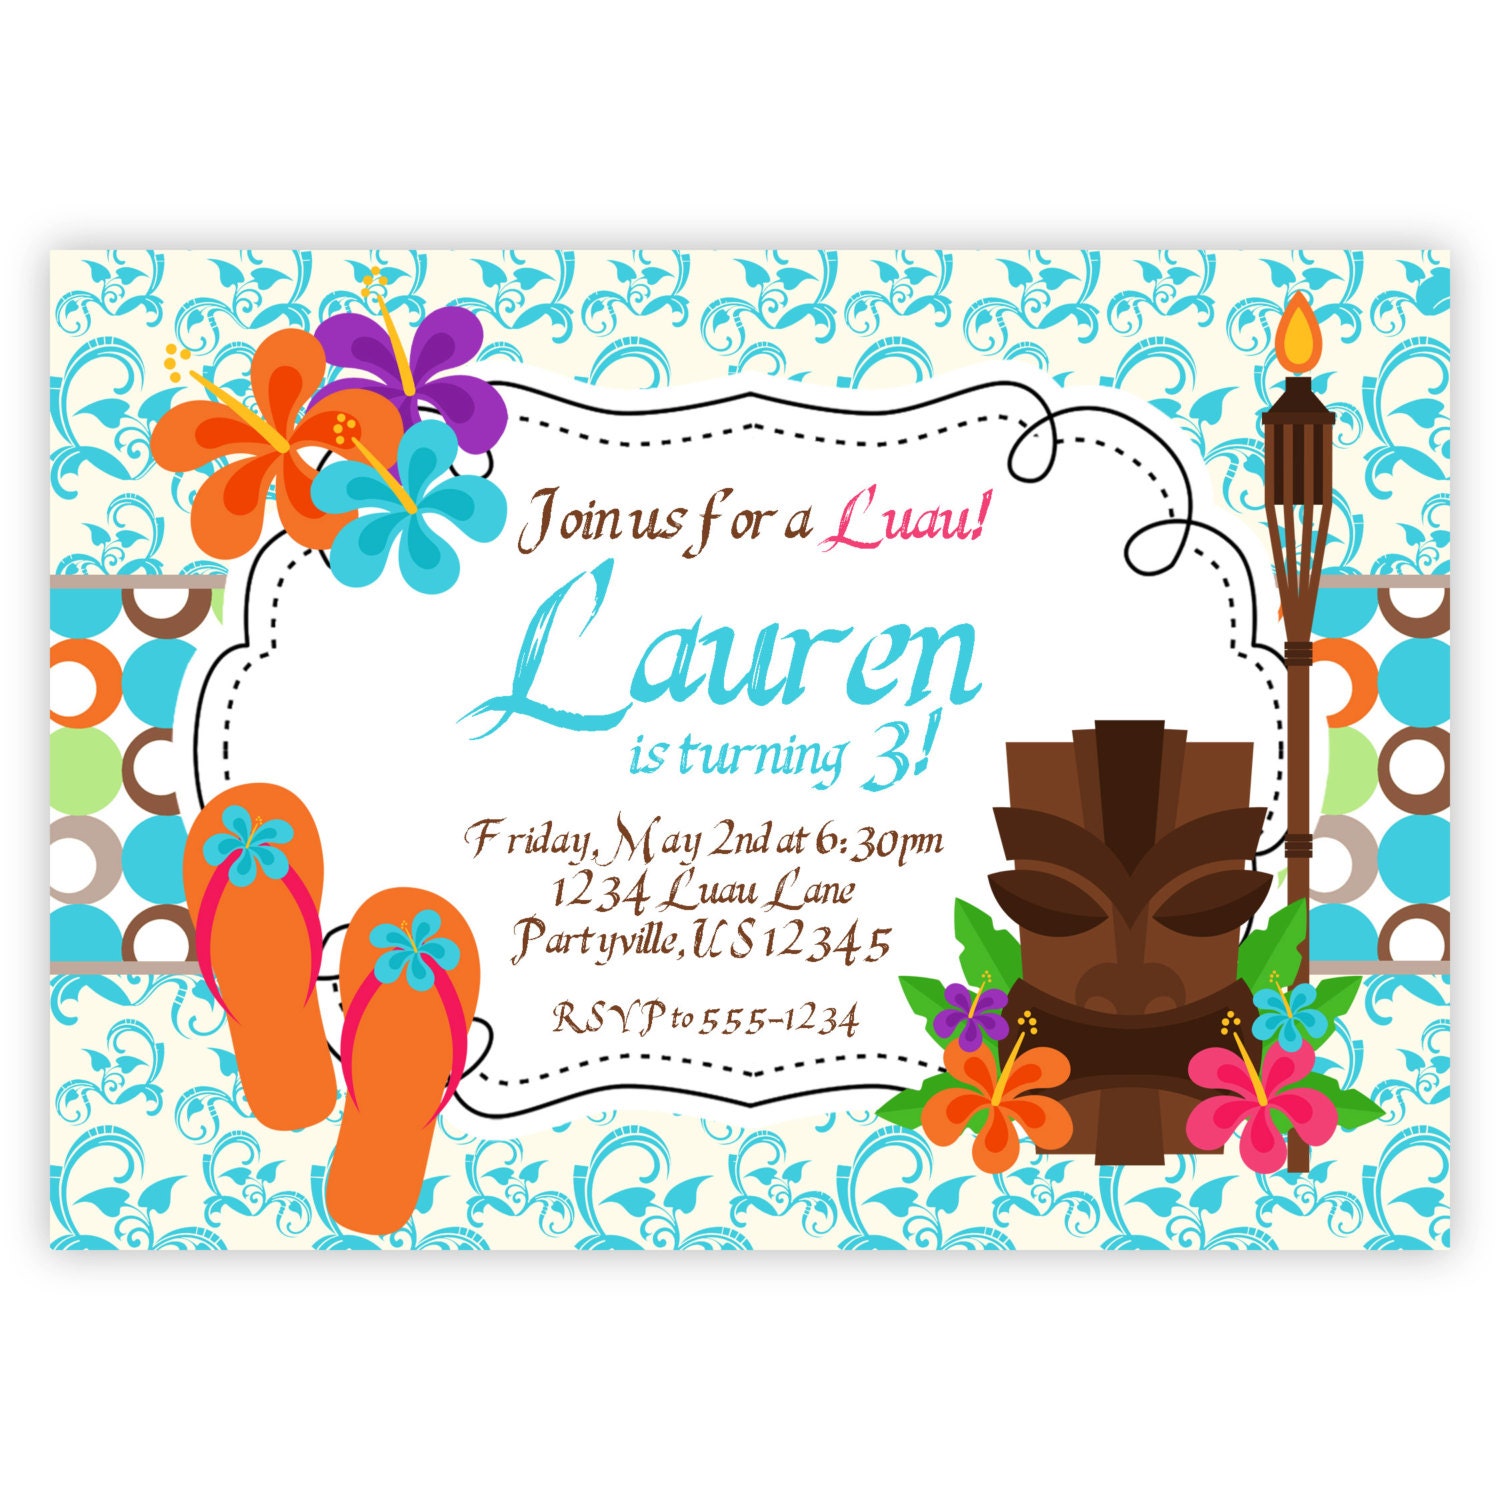 9 Best Images of Free Printable Luau Flyers - Free ...